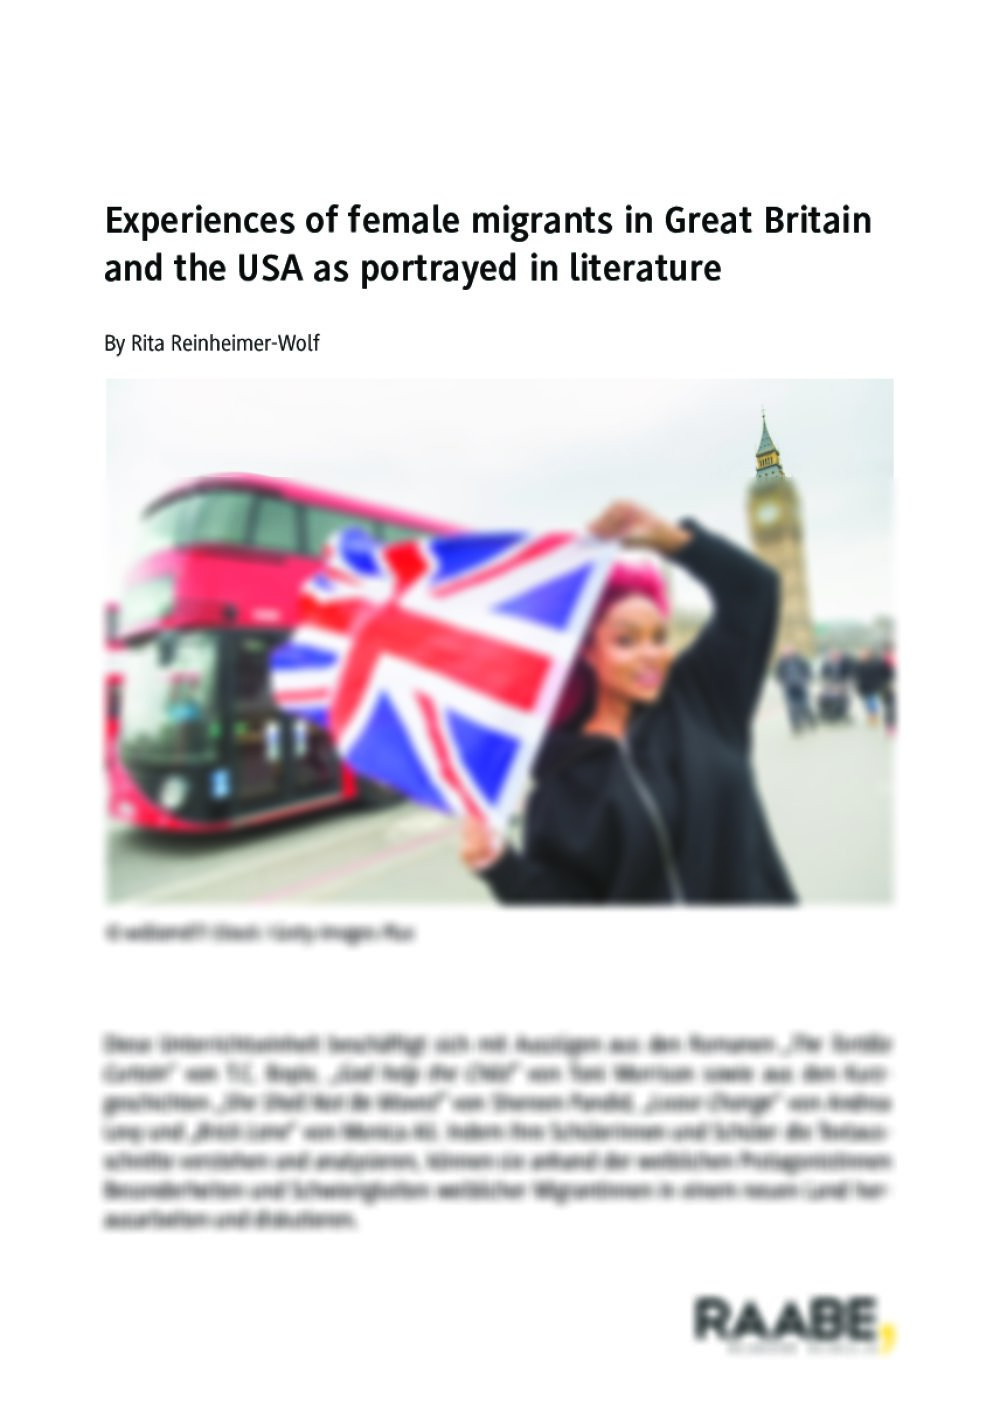 Experiences of female migrants in Great Britain and the USA as portrayed in literature - Seite 1